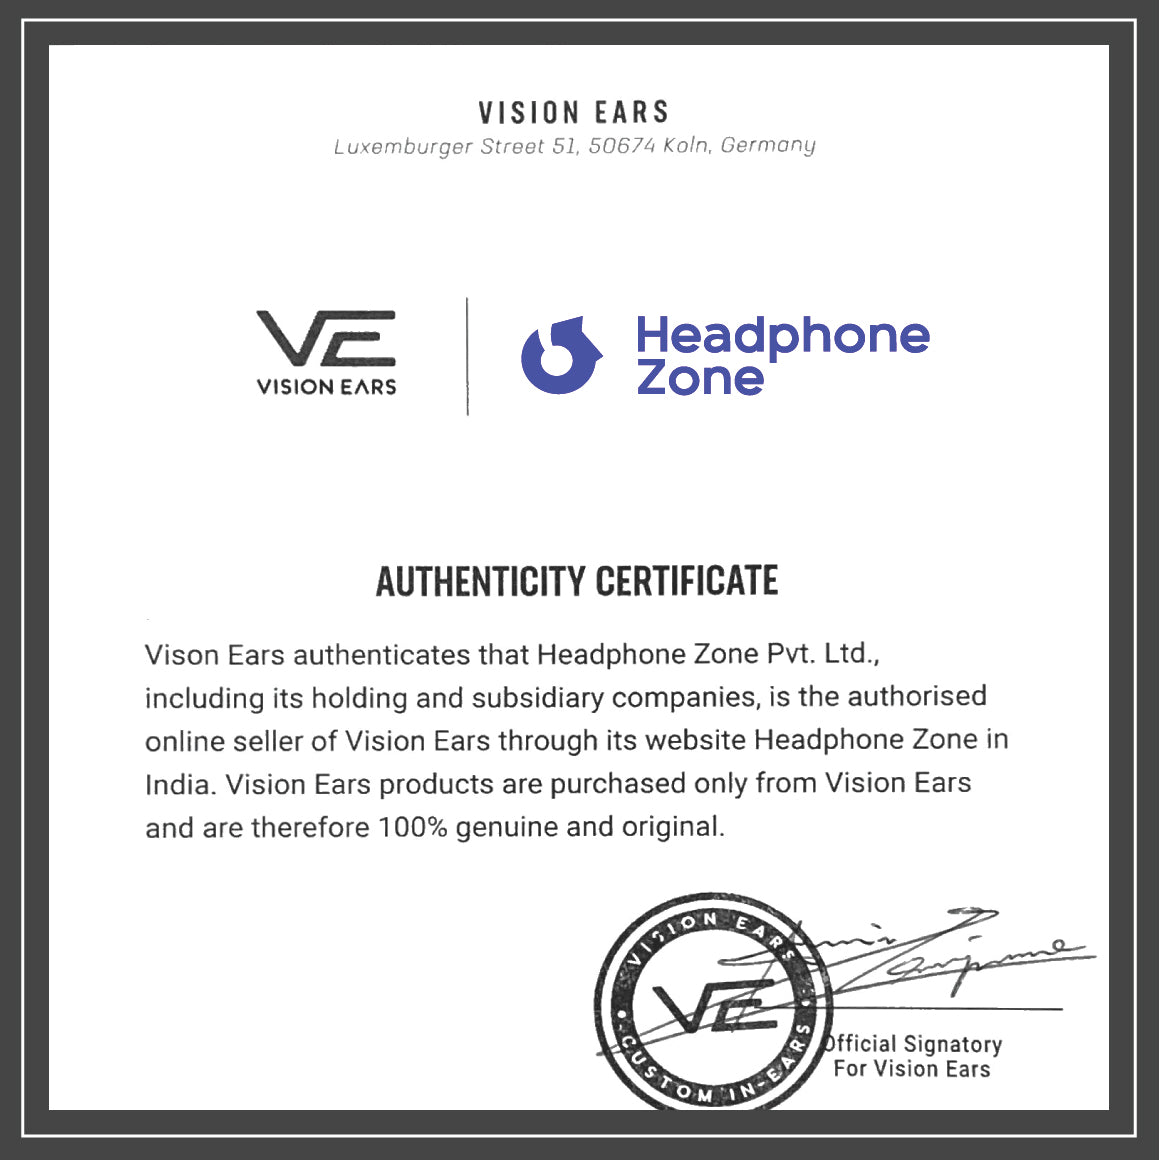 Headphone-Zone-Vision Ears-Authenticty-Certificate